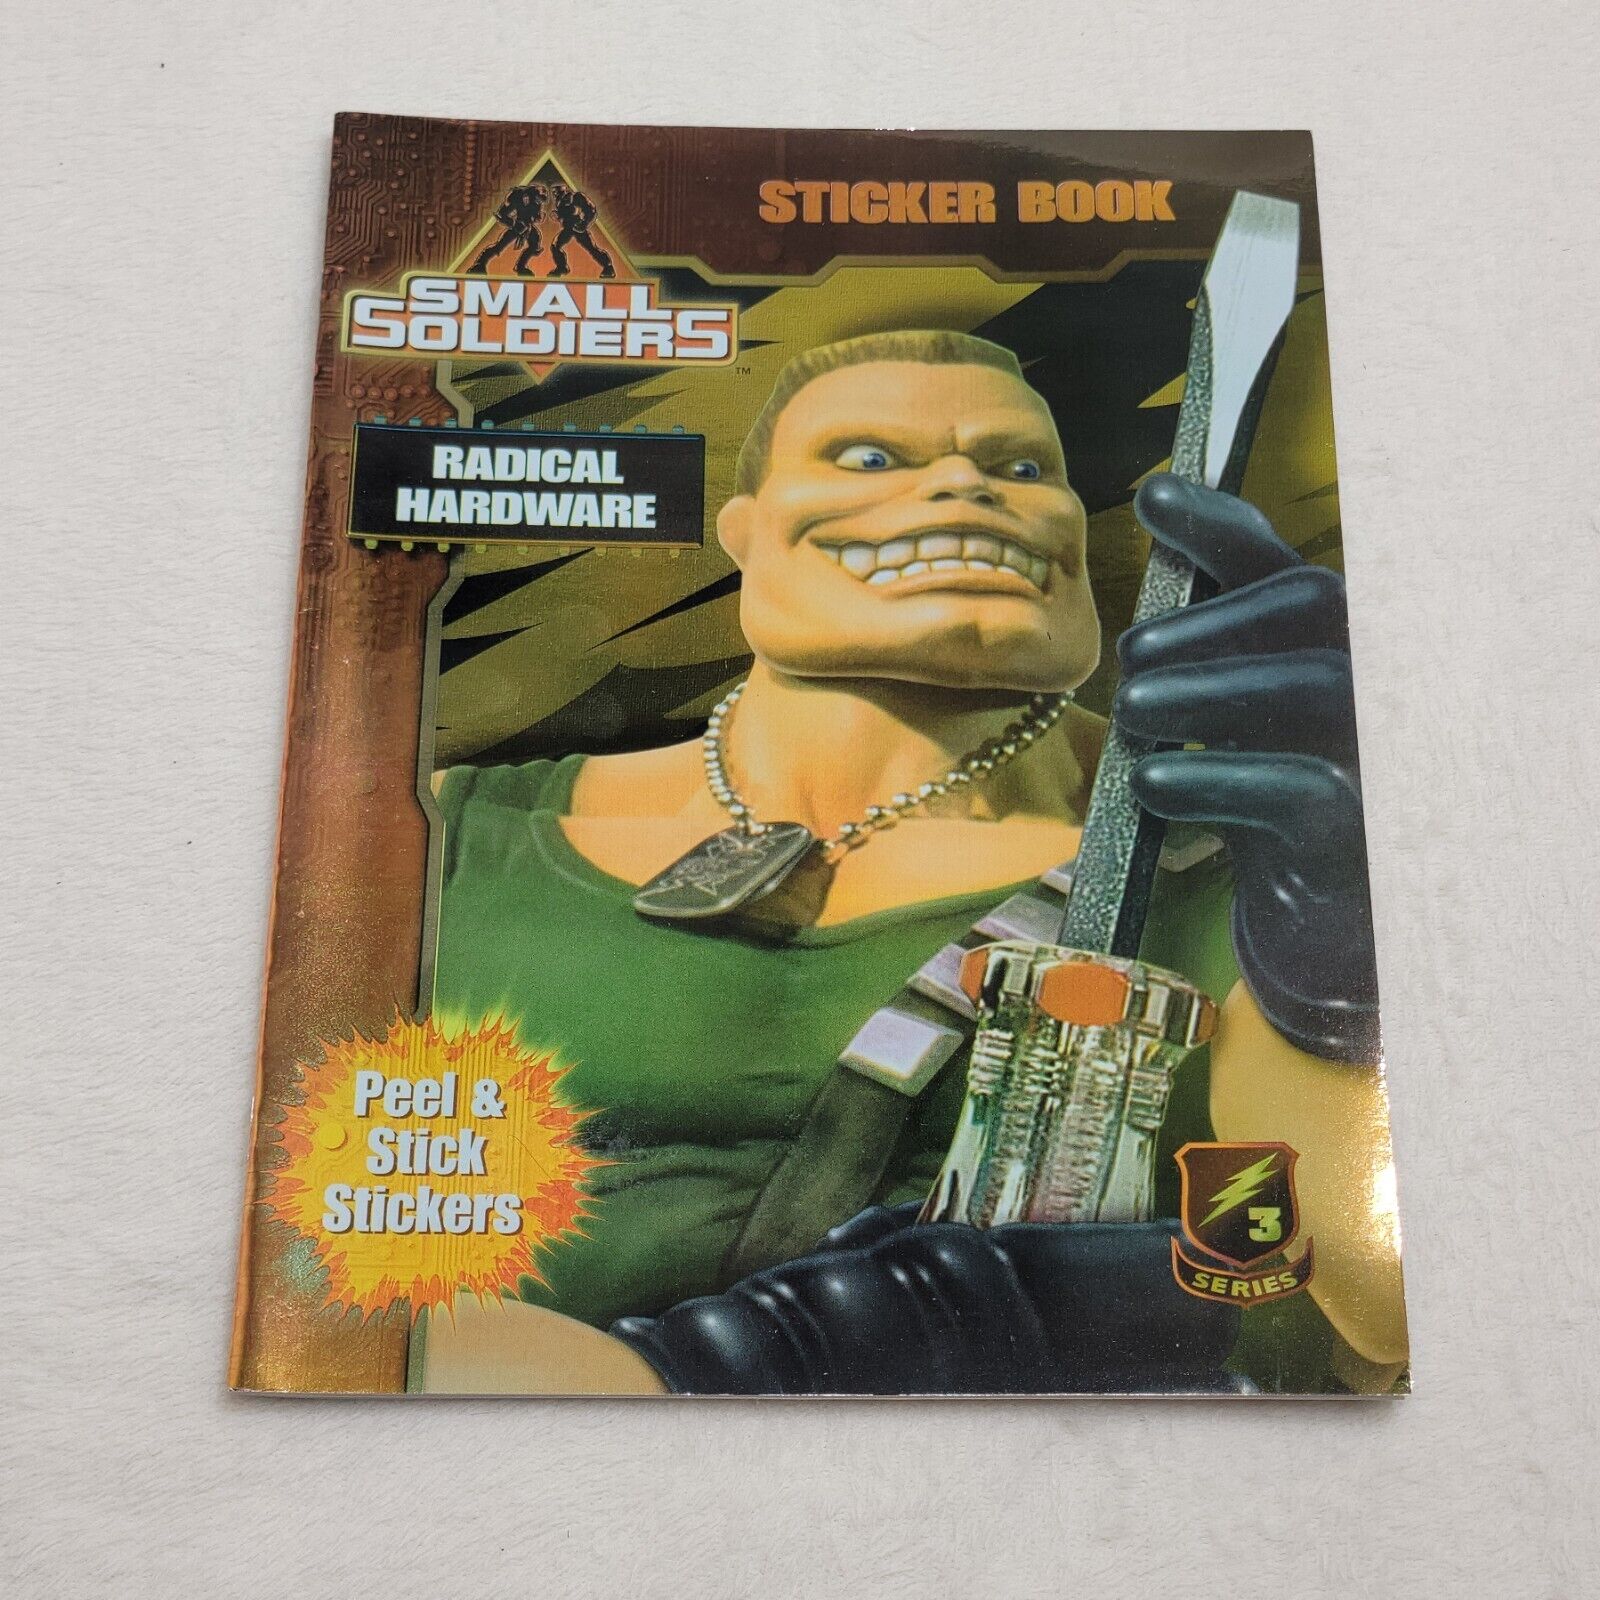 1998 Small Soldiers Sticker Book Series 3 ‘Radical Hardware’- NEW